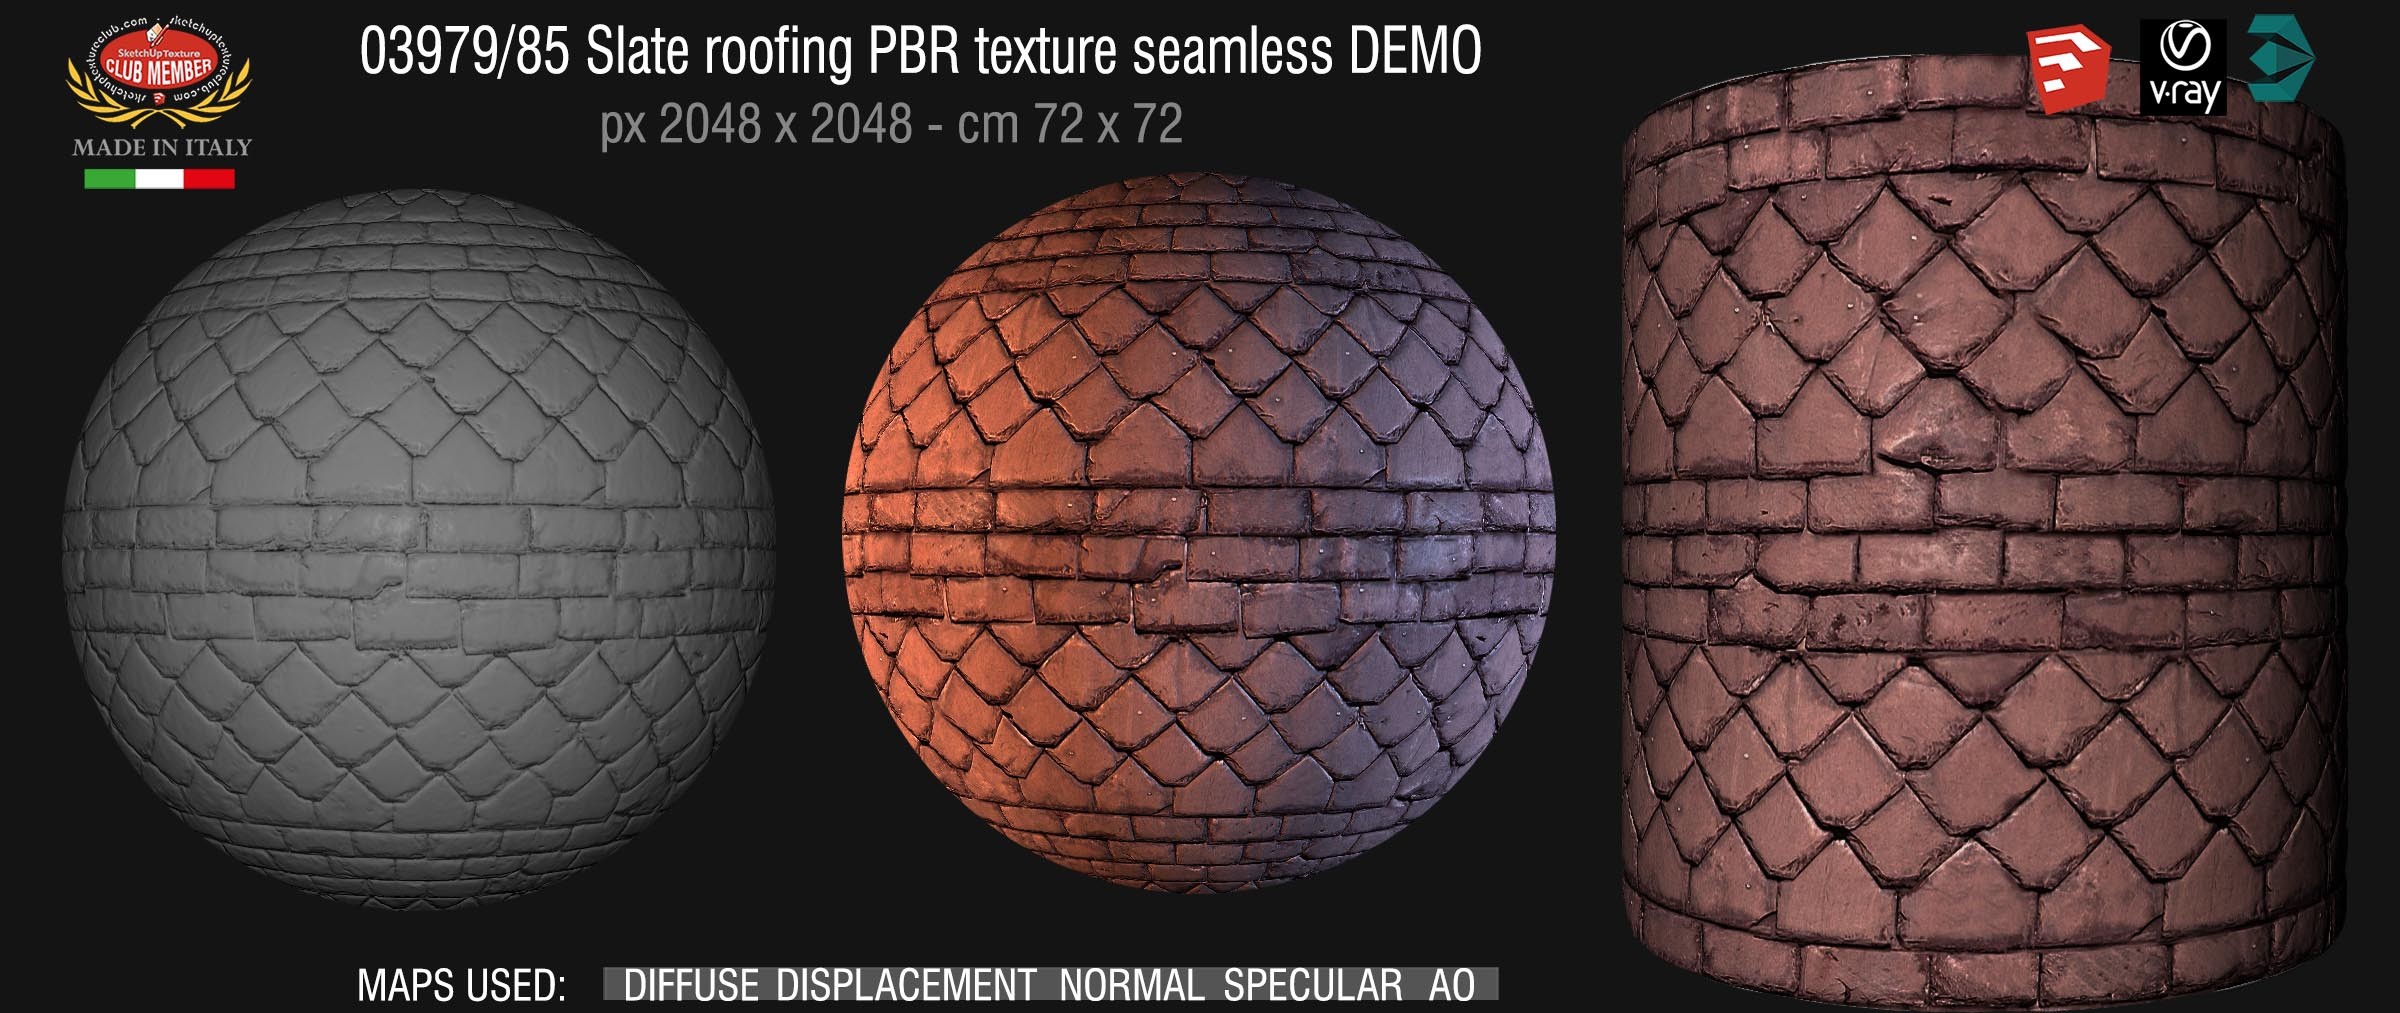 03979_85 Slate roofing PBR texture seamless DEMO